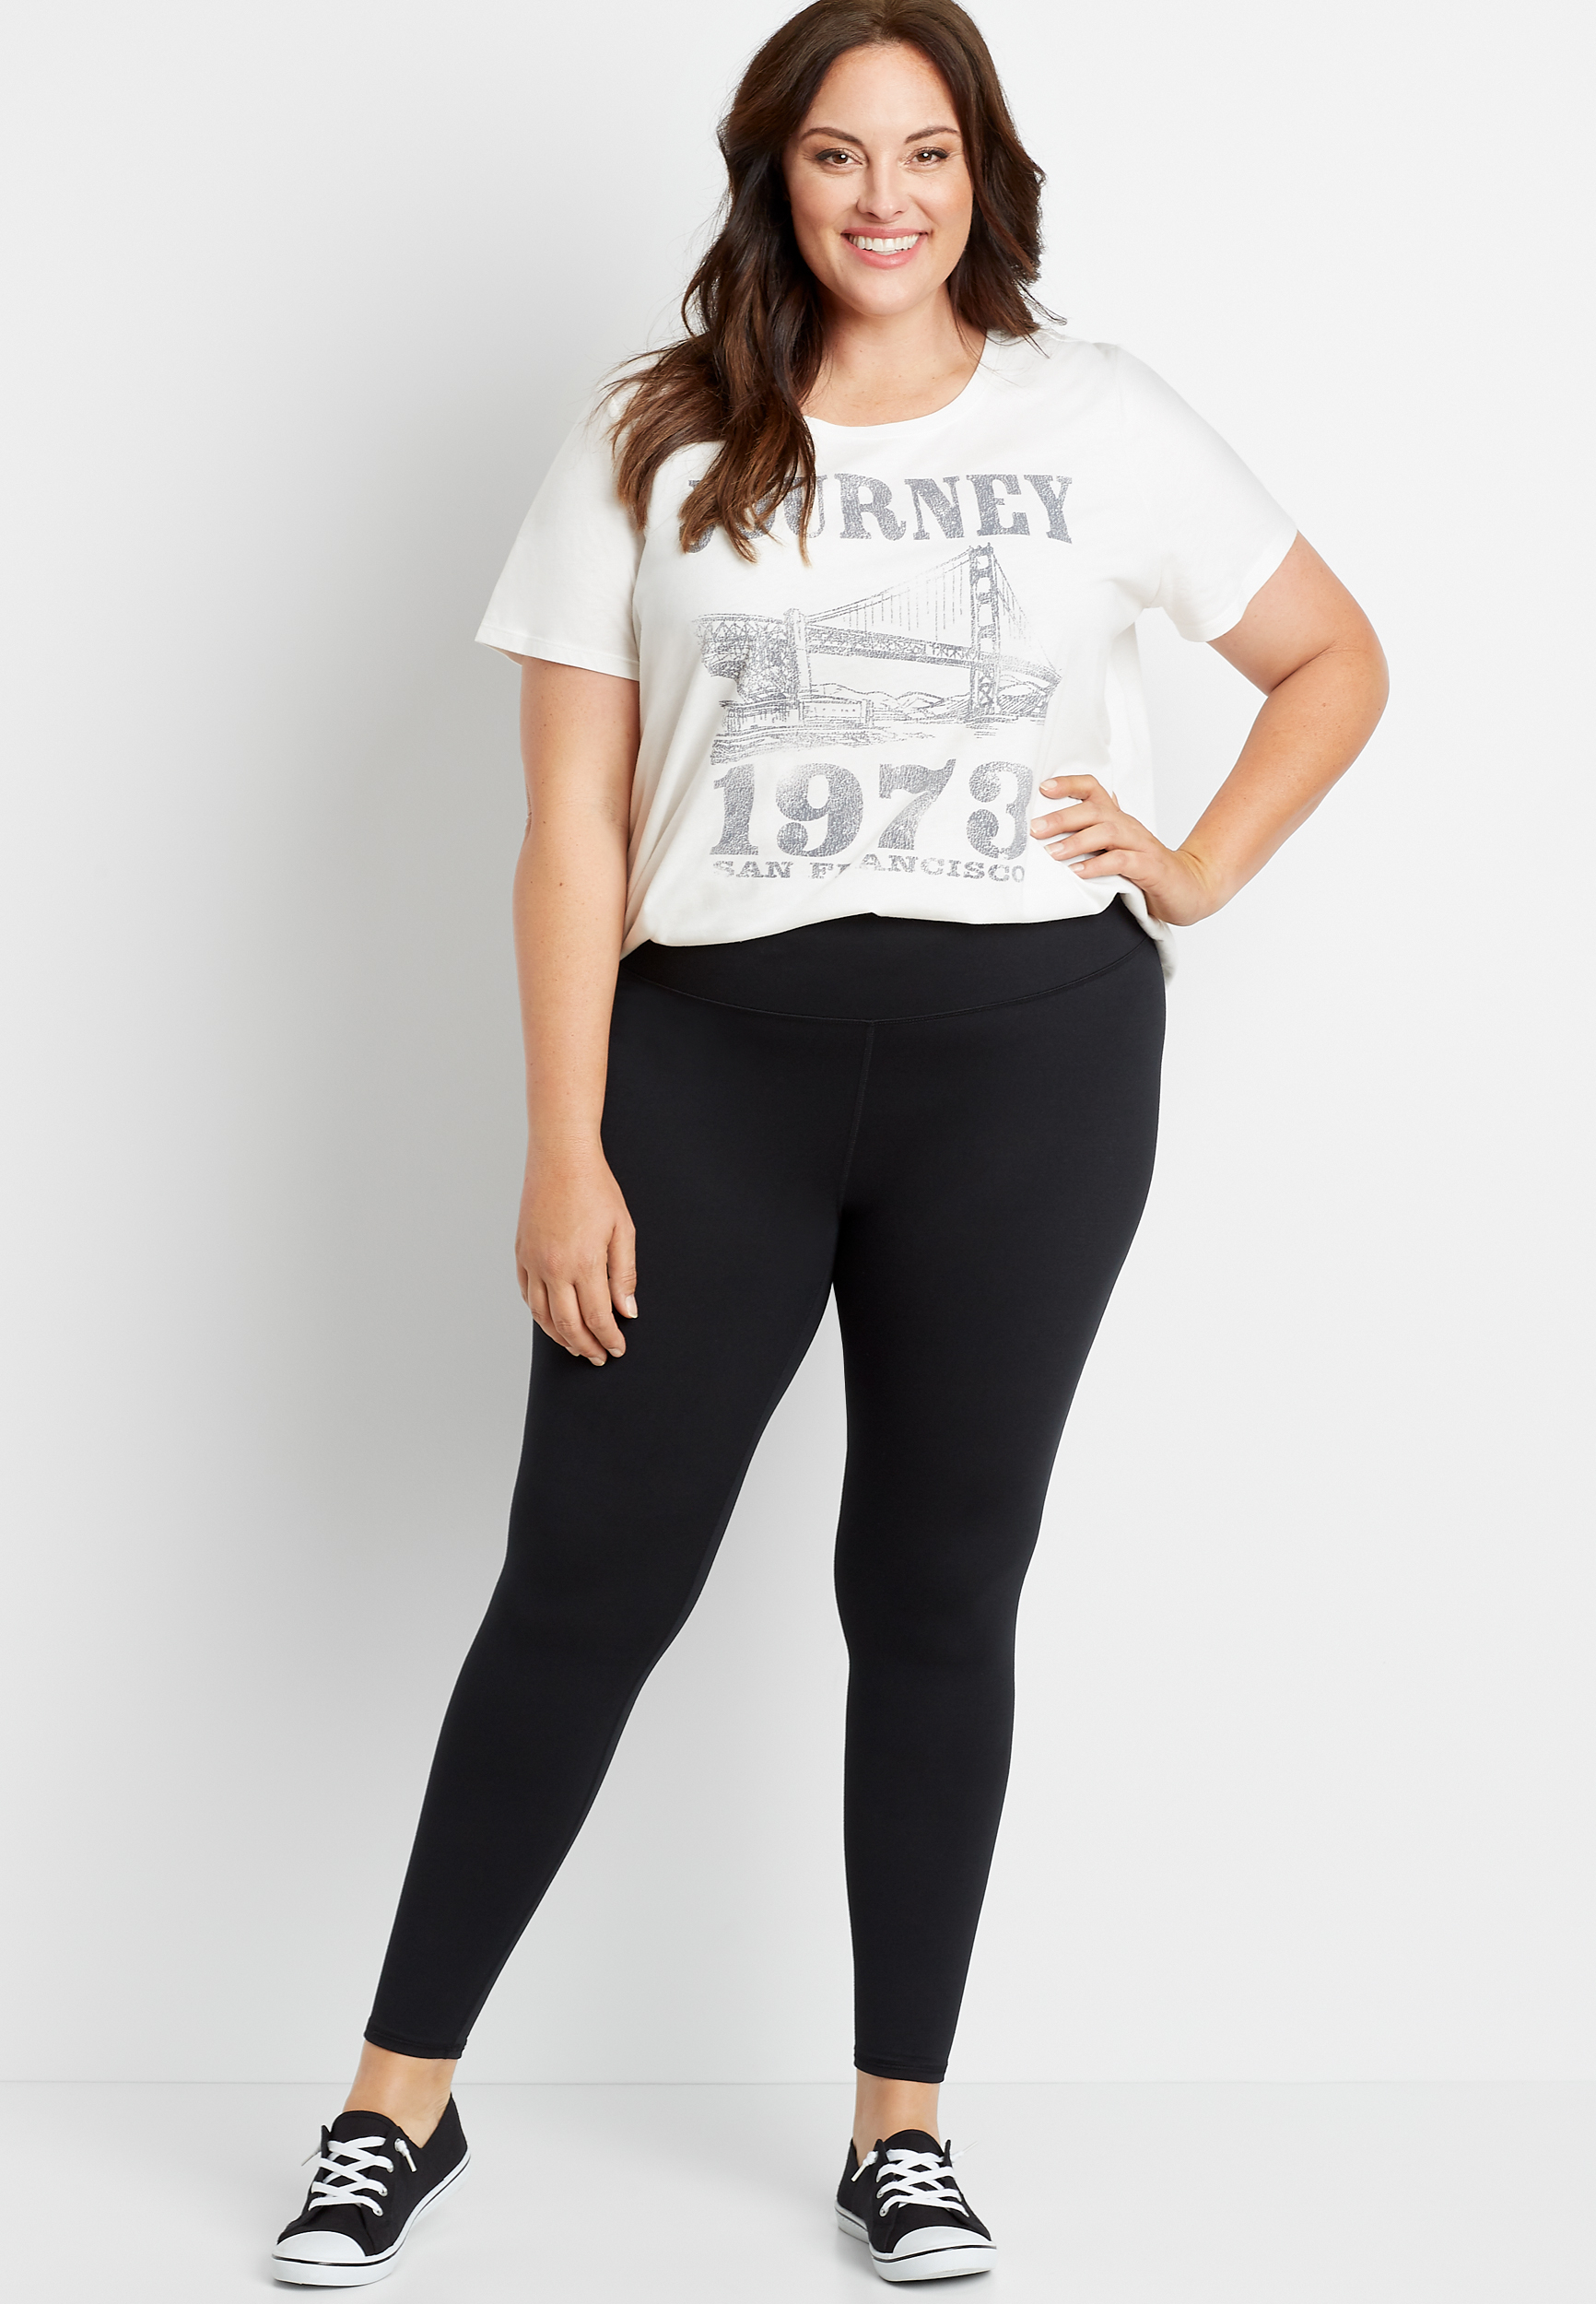 plus size legging outfits